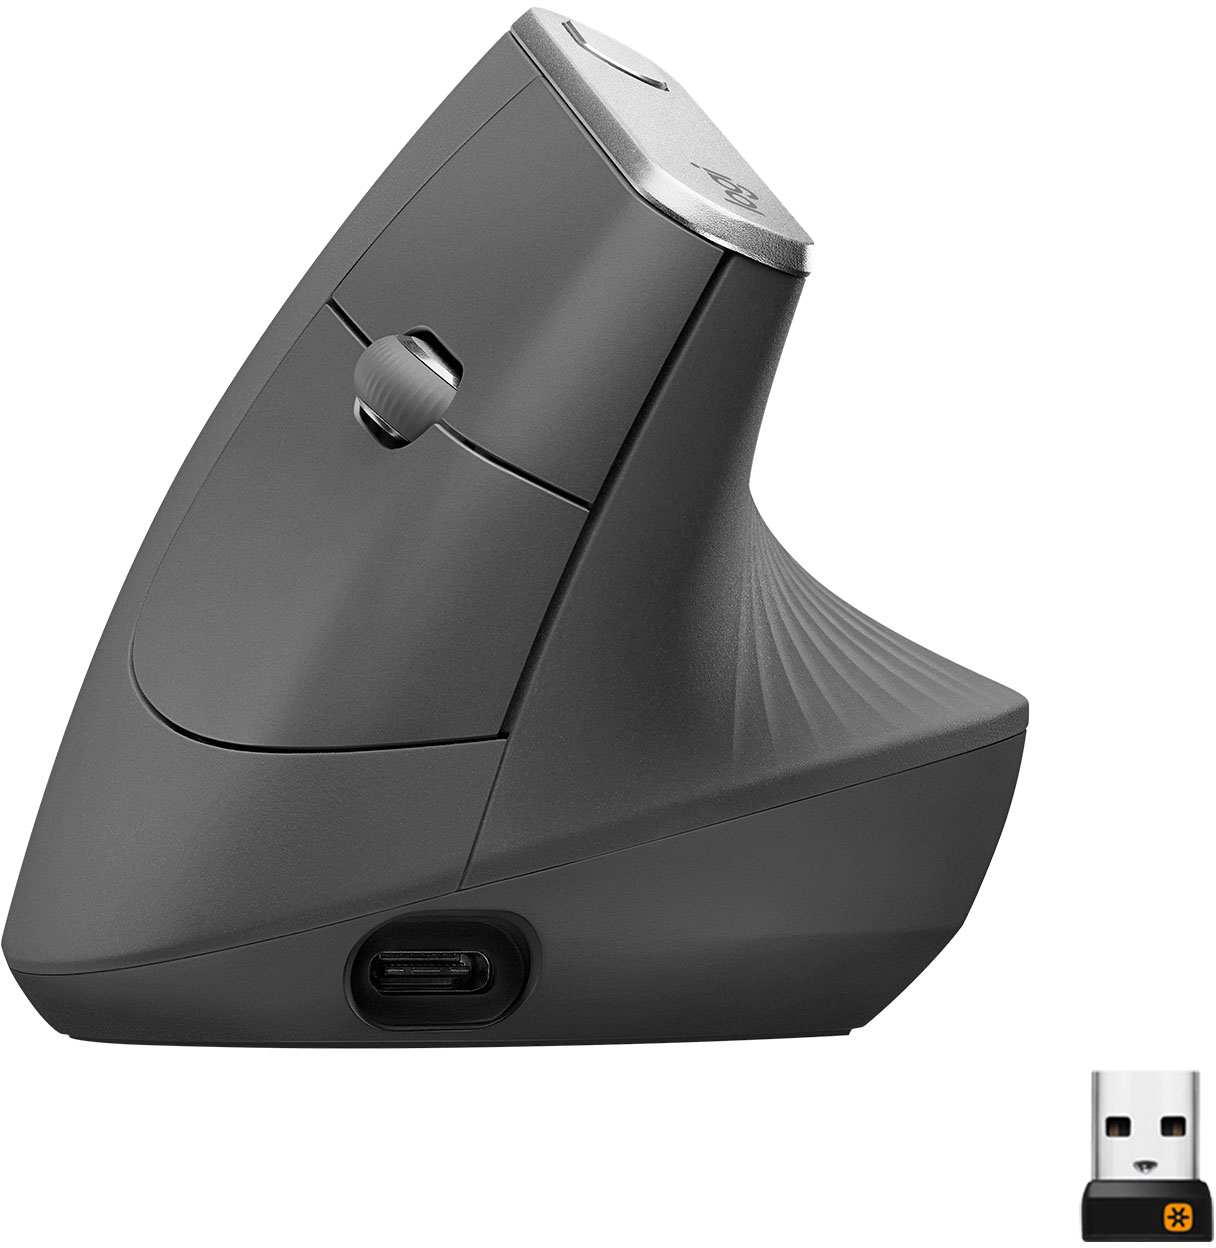 invadere kritiker uhøjtidelig Logitech MX Vertical Advanced Wireless Optical Ergonomic Mouse with USB and  Bluetooth Connection Graphite 910-005447 - Best Buy